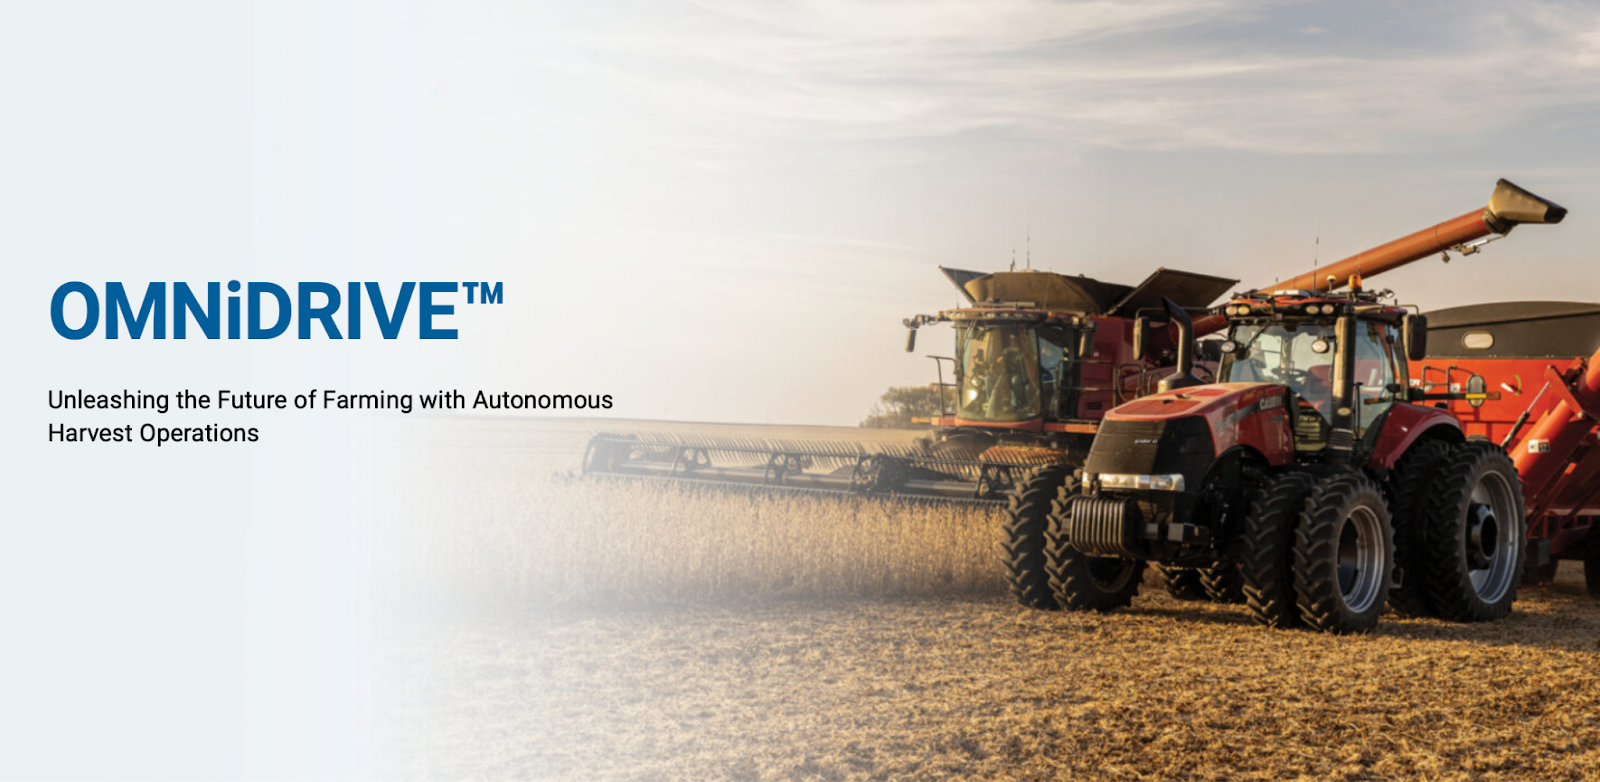 The heading "OMNIDRIVE" sits above text that says "Unleashing the future of farming with autonomous harvest operations".